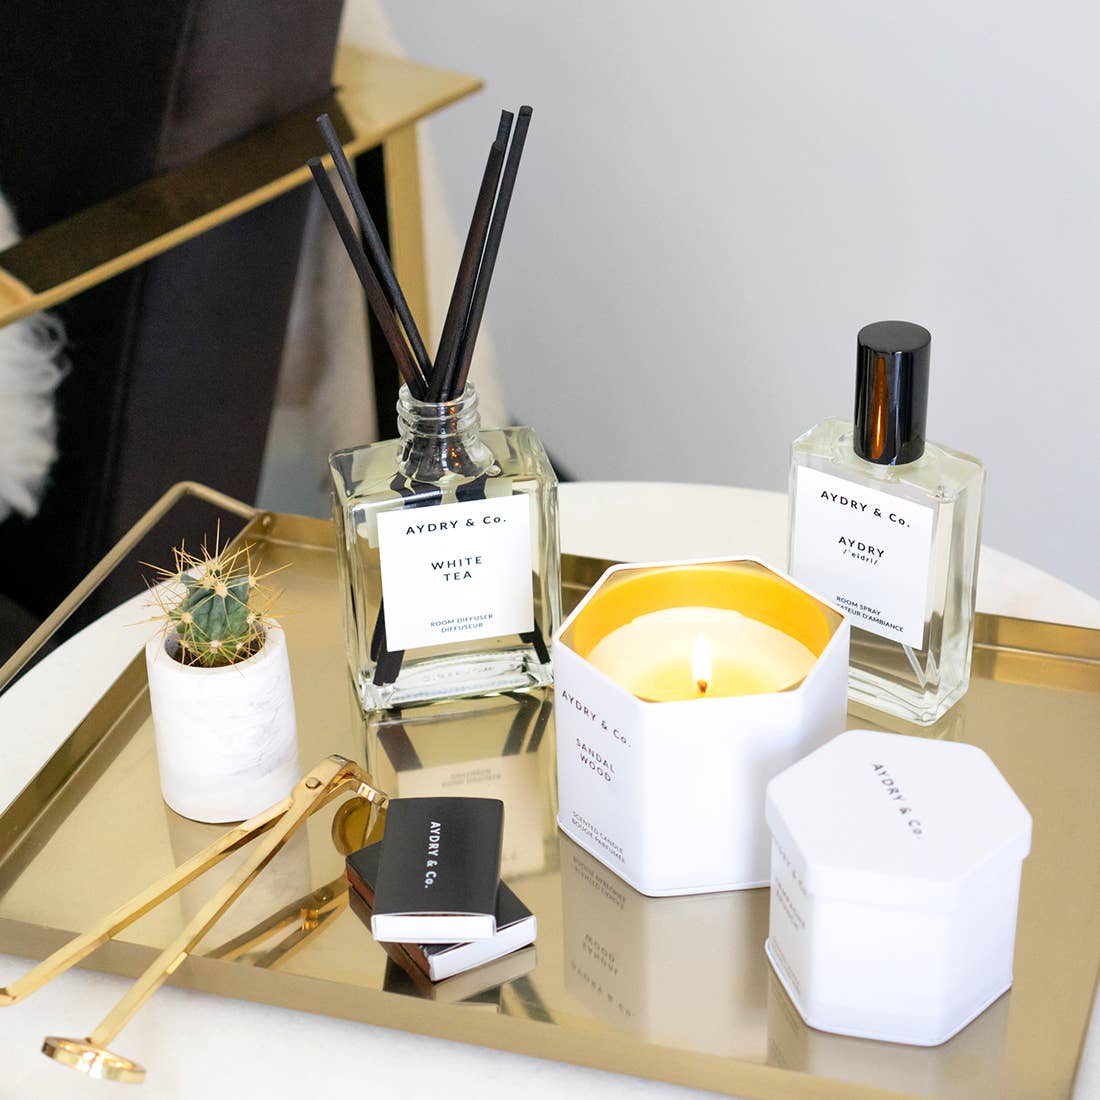 The Champagne Brunch Room Diffuser by AYDRY &amp; Co.